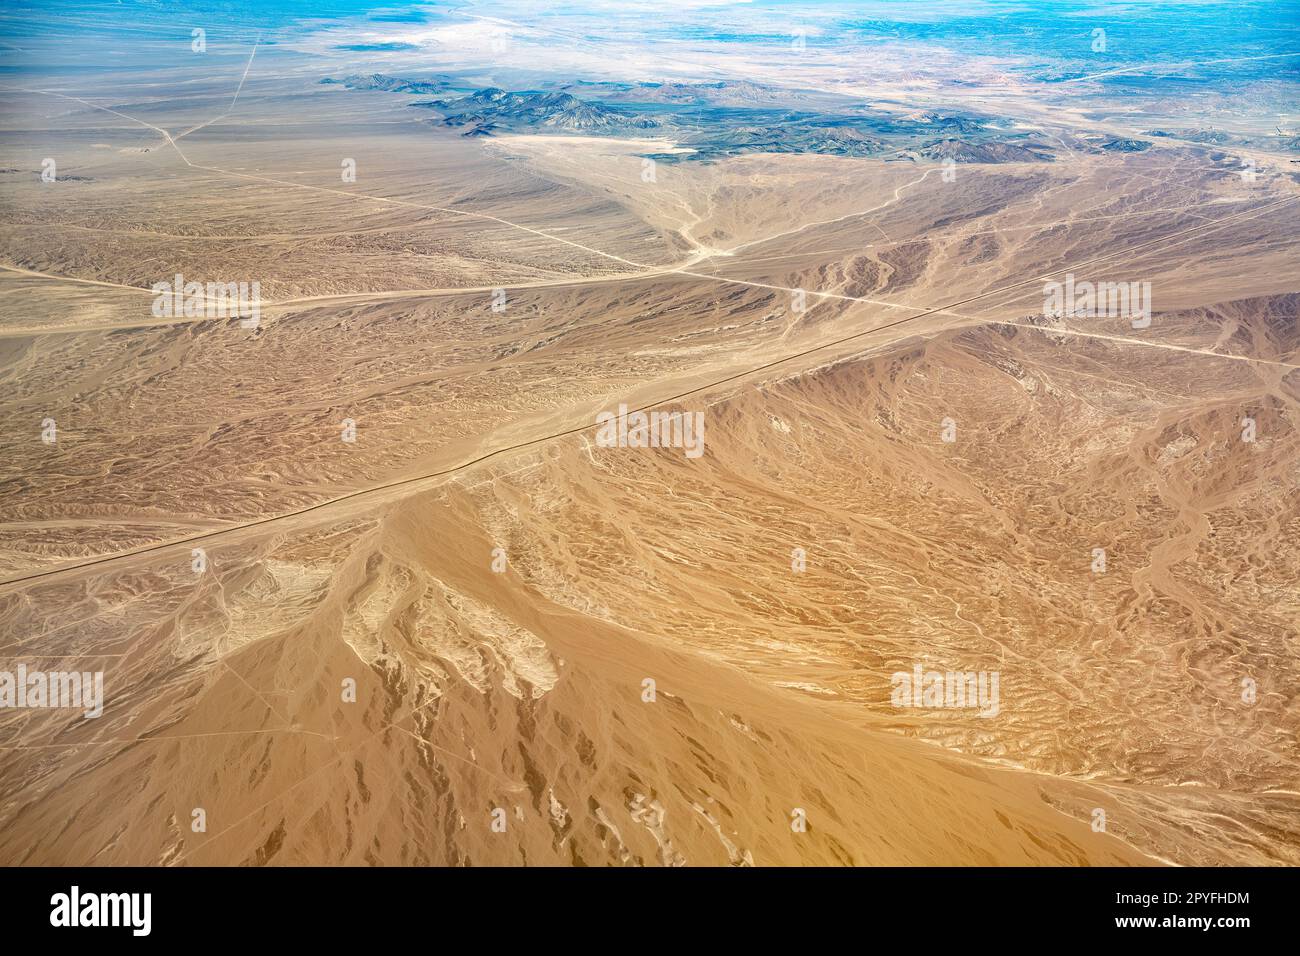 Aerial view of a road in the highlands of the Atacama Desert, Chile Stock Photo